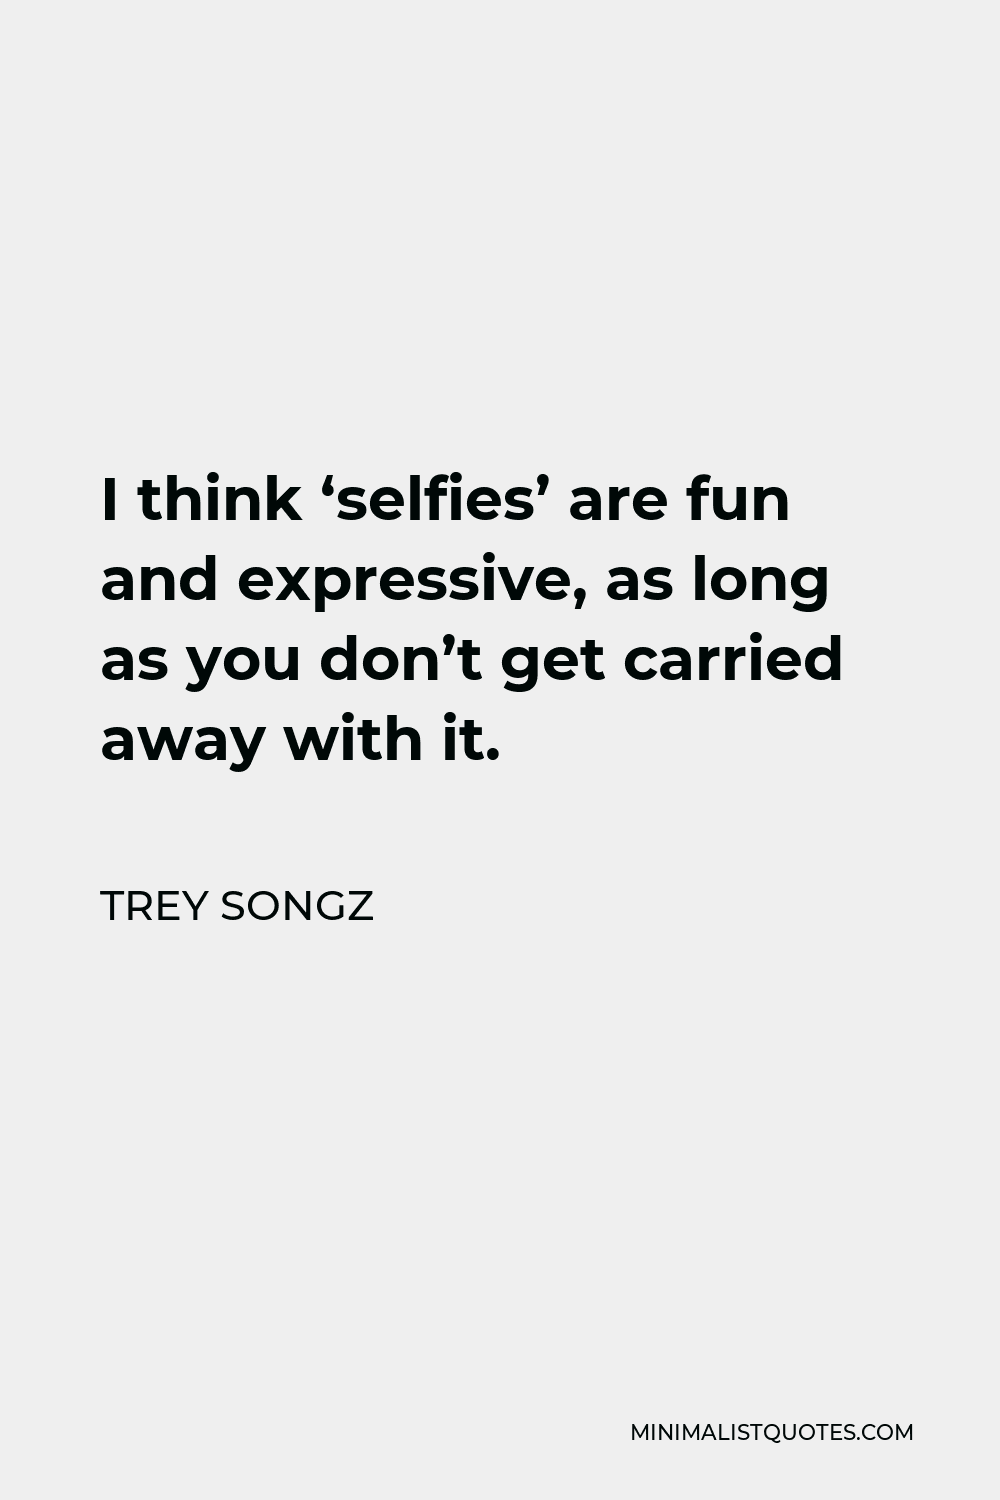 Trey Songz Quote - I think ‘selfies’ are fun and expressive, as long as you don’t get carried away with it.